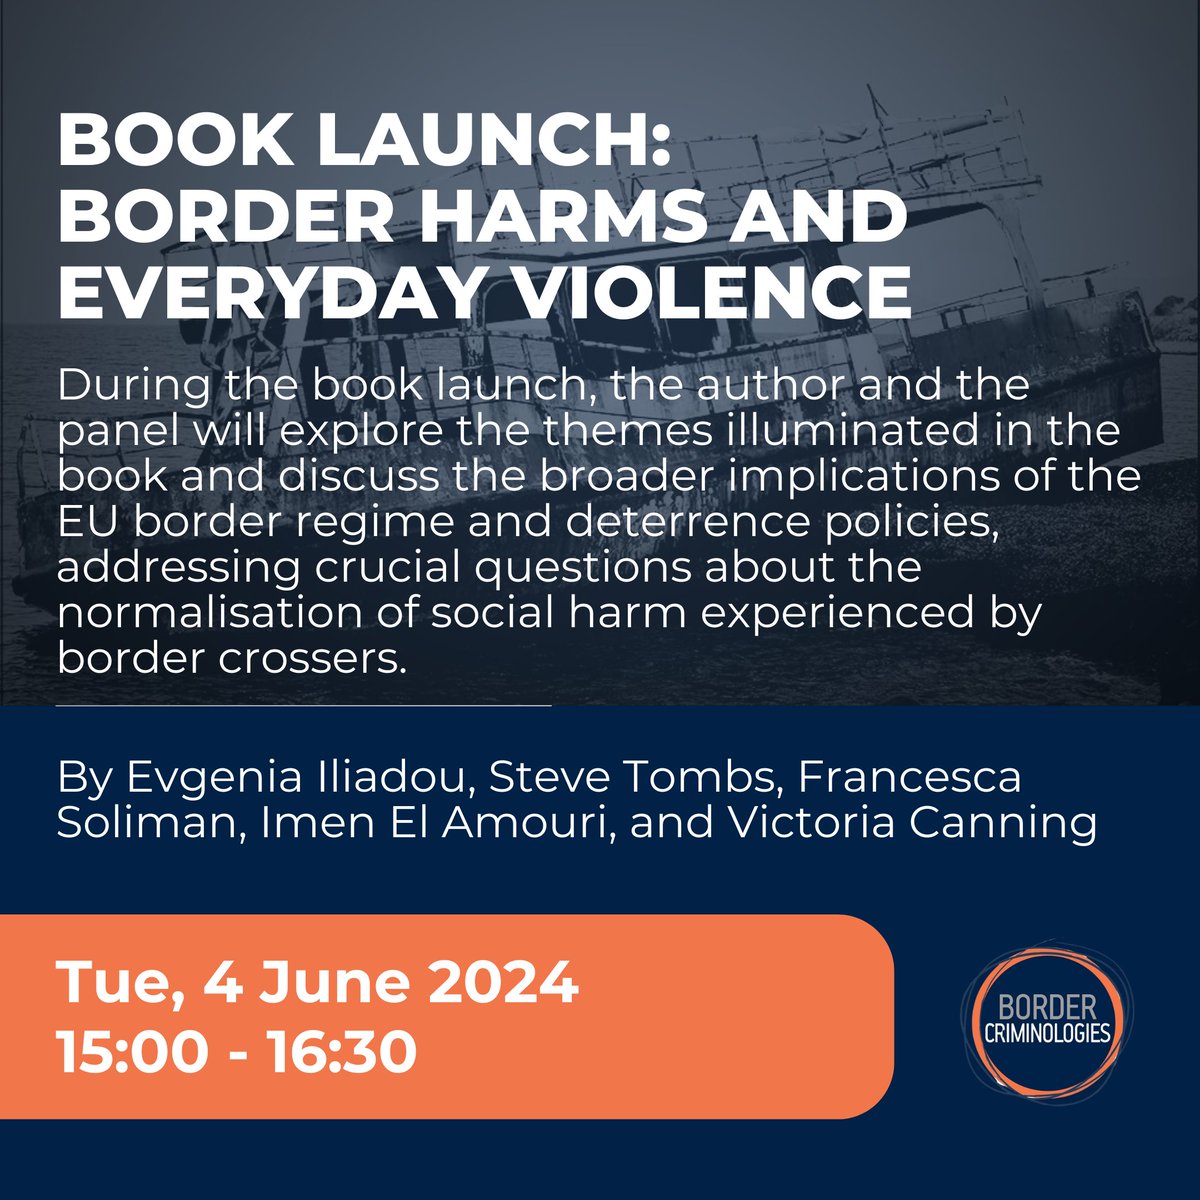 [New Event 🗓️] Join our dialogue on the collective, global responsibility for safeguarding border crossers' #humanrights and understanding the #refugeecrisis as part of a continuum of border harms across time and space in @EvgeniaIliadou 's book launch: law.ox.ac.uk/content/event/…